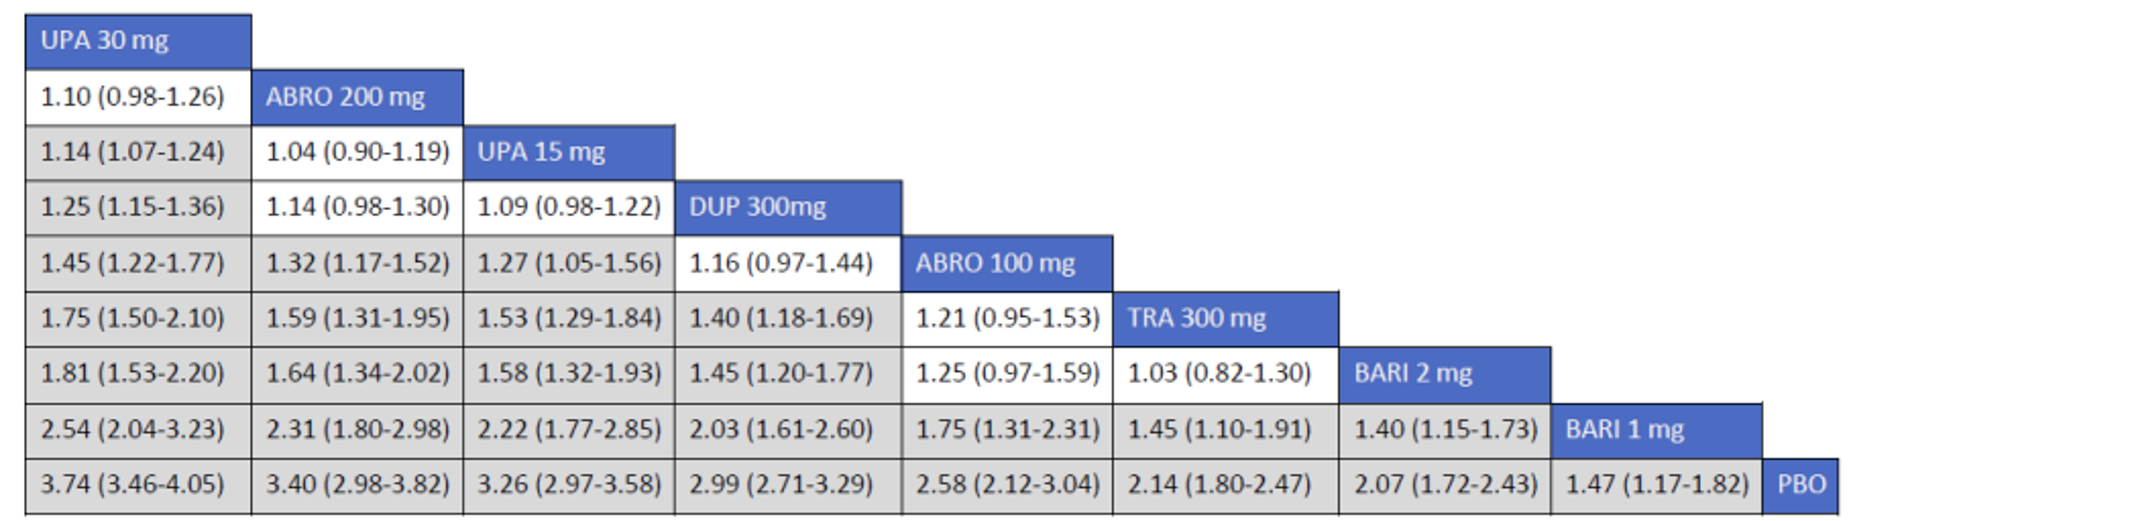 Figure shows the network meta-analysis results for EASI-50 in the monotherapy trials conducted in adults with atopic dermatitis.